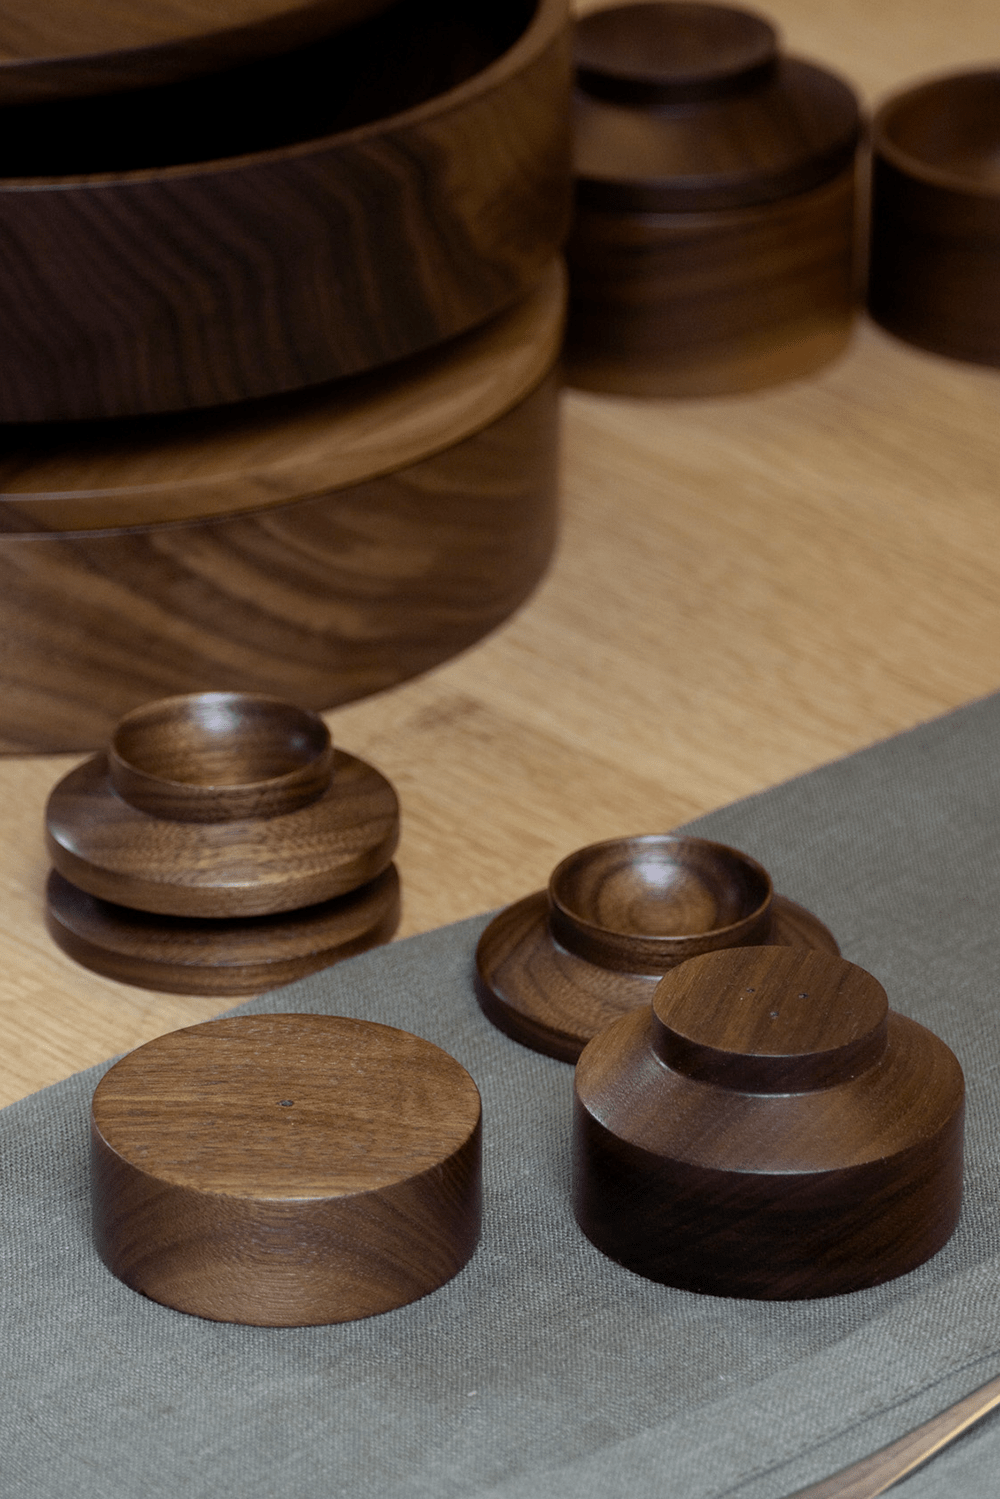 Stackable Glass Storage Jars With Hand-Turned Walnut Wooden Lids